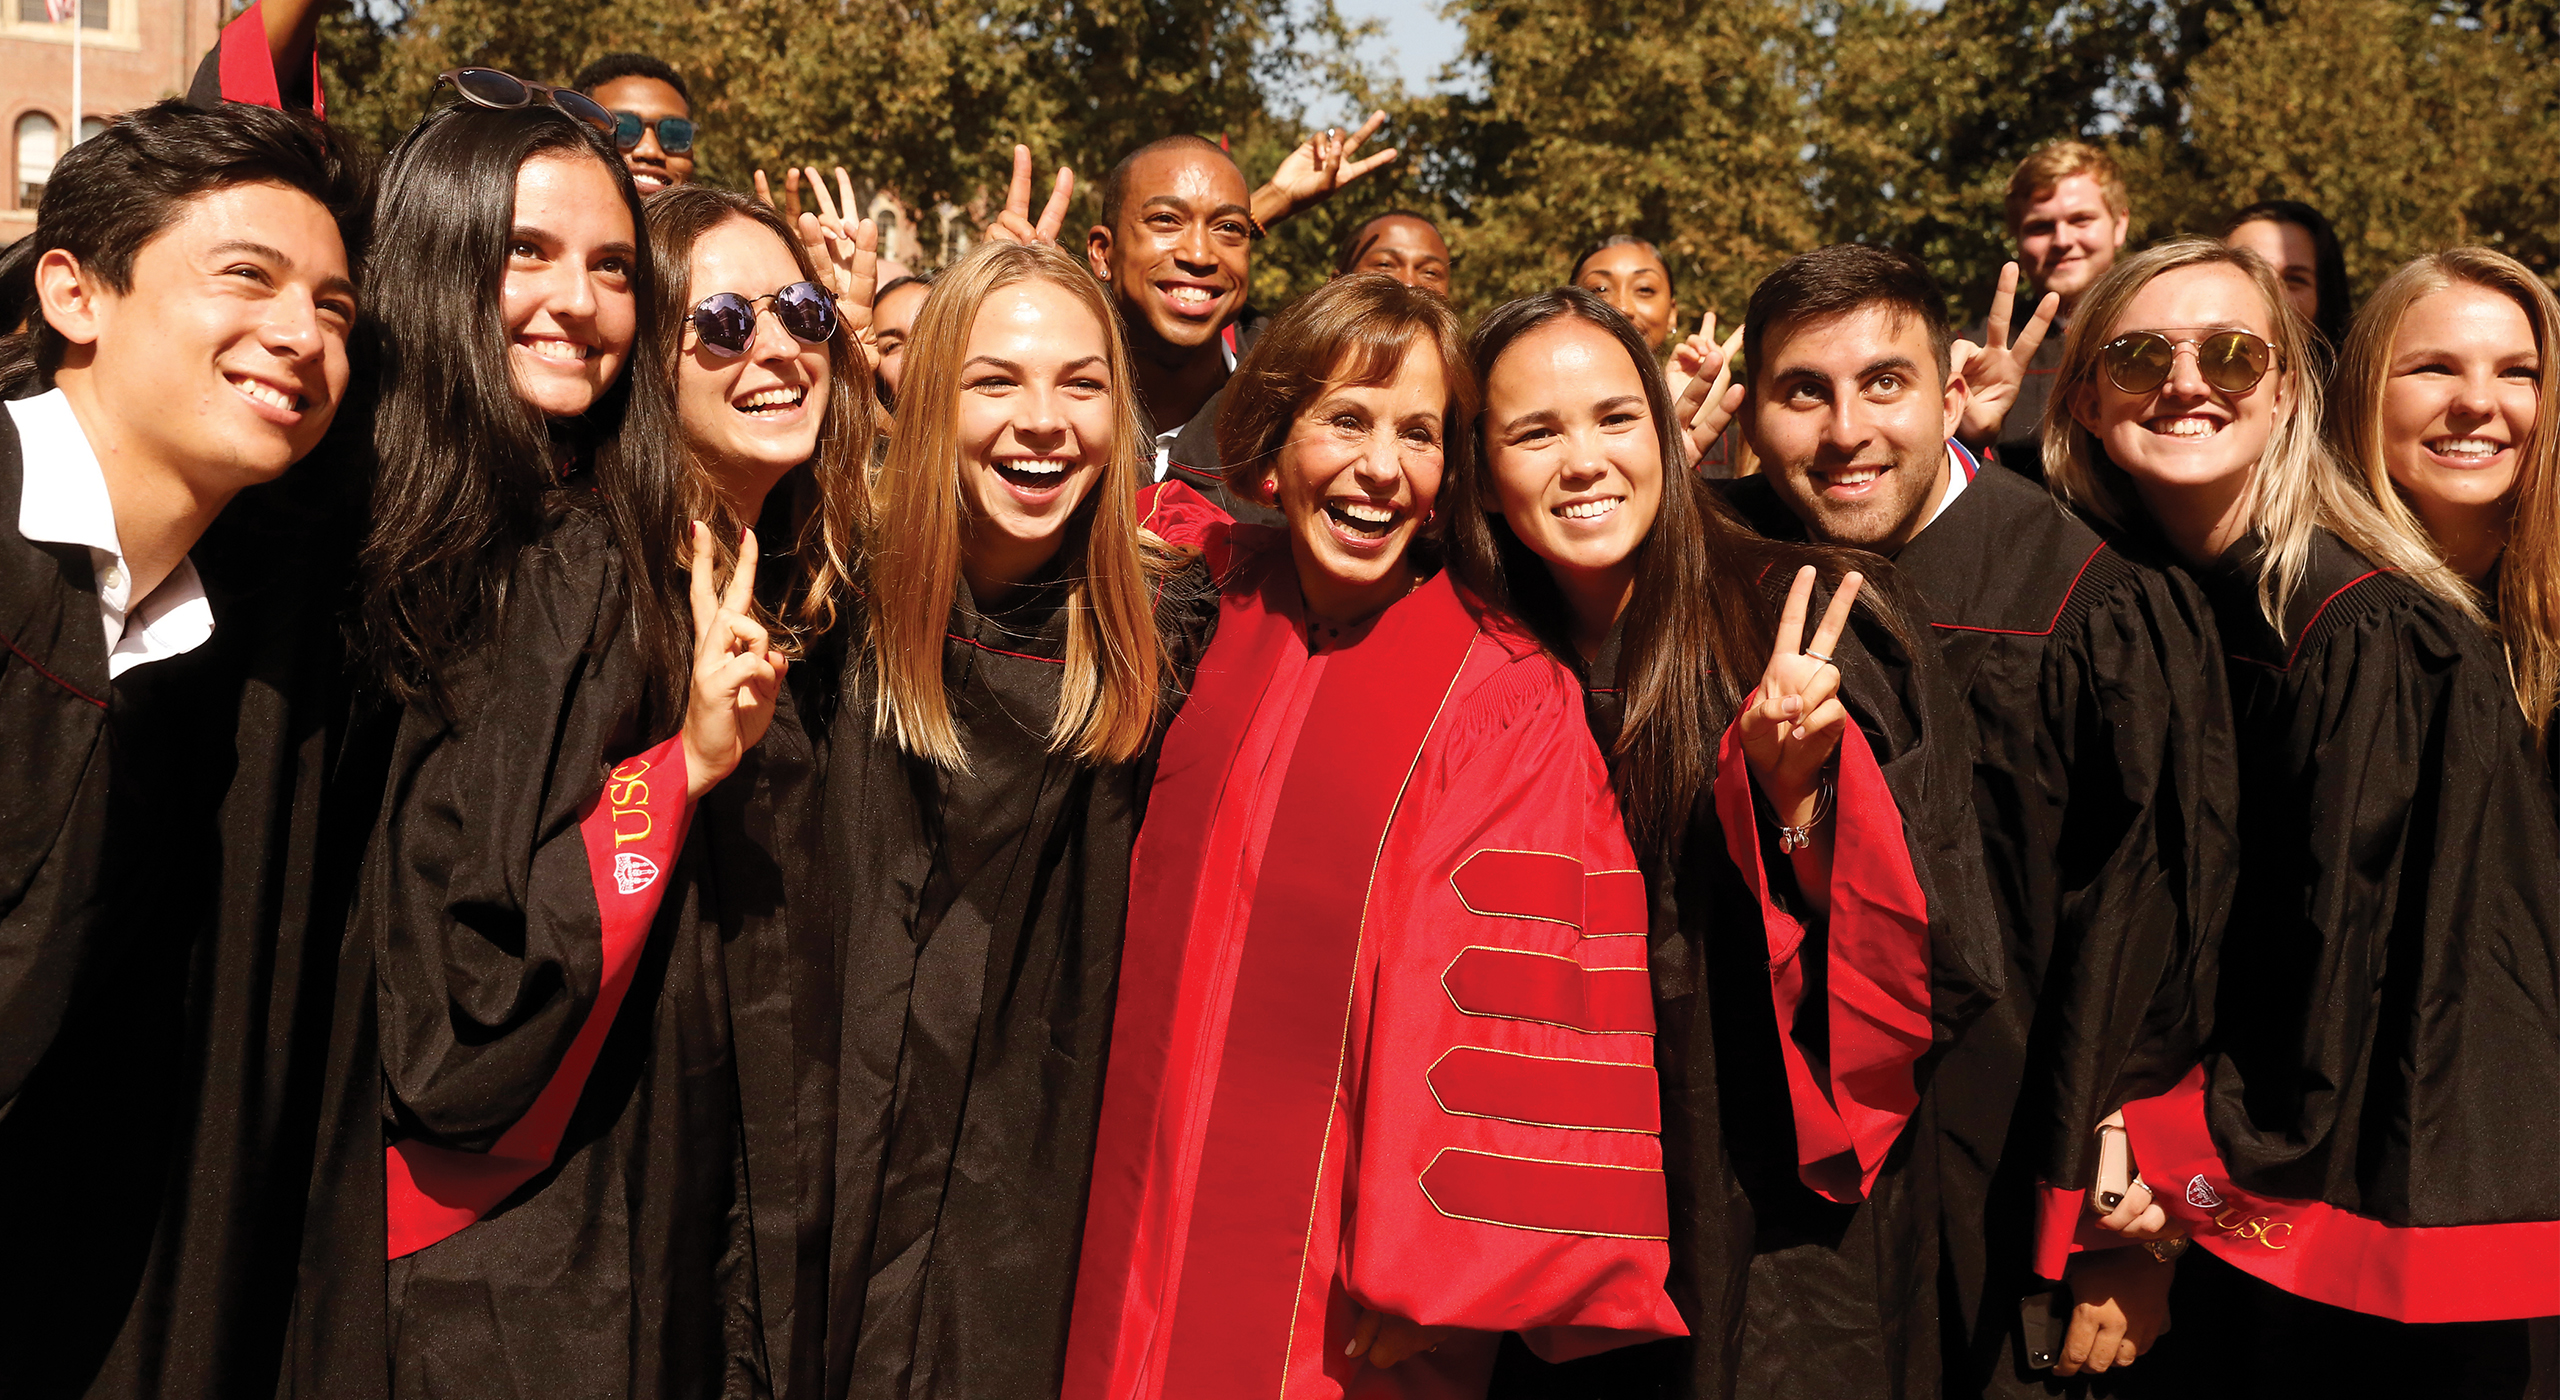 USC President Carol Folt with a group of students at Commencement